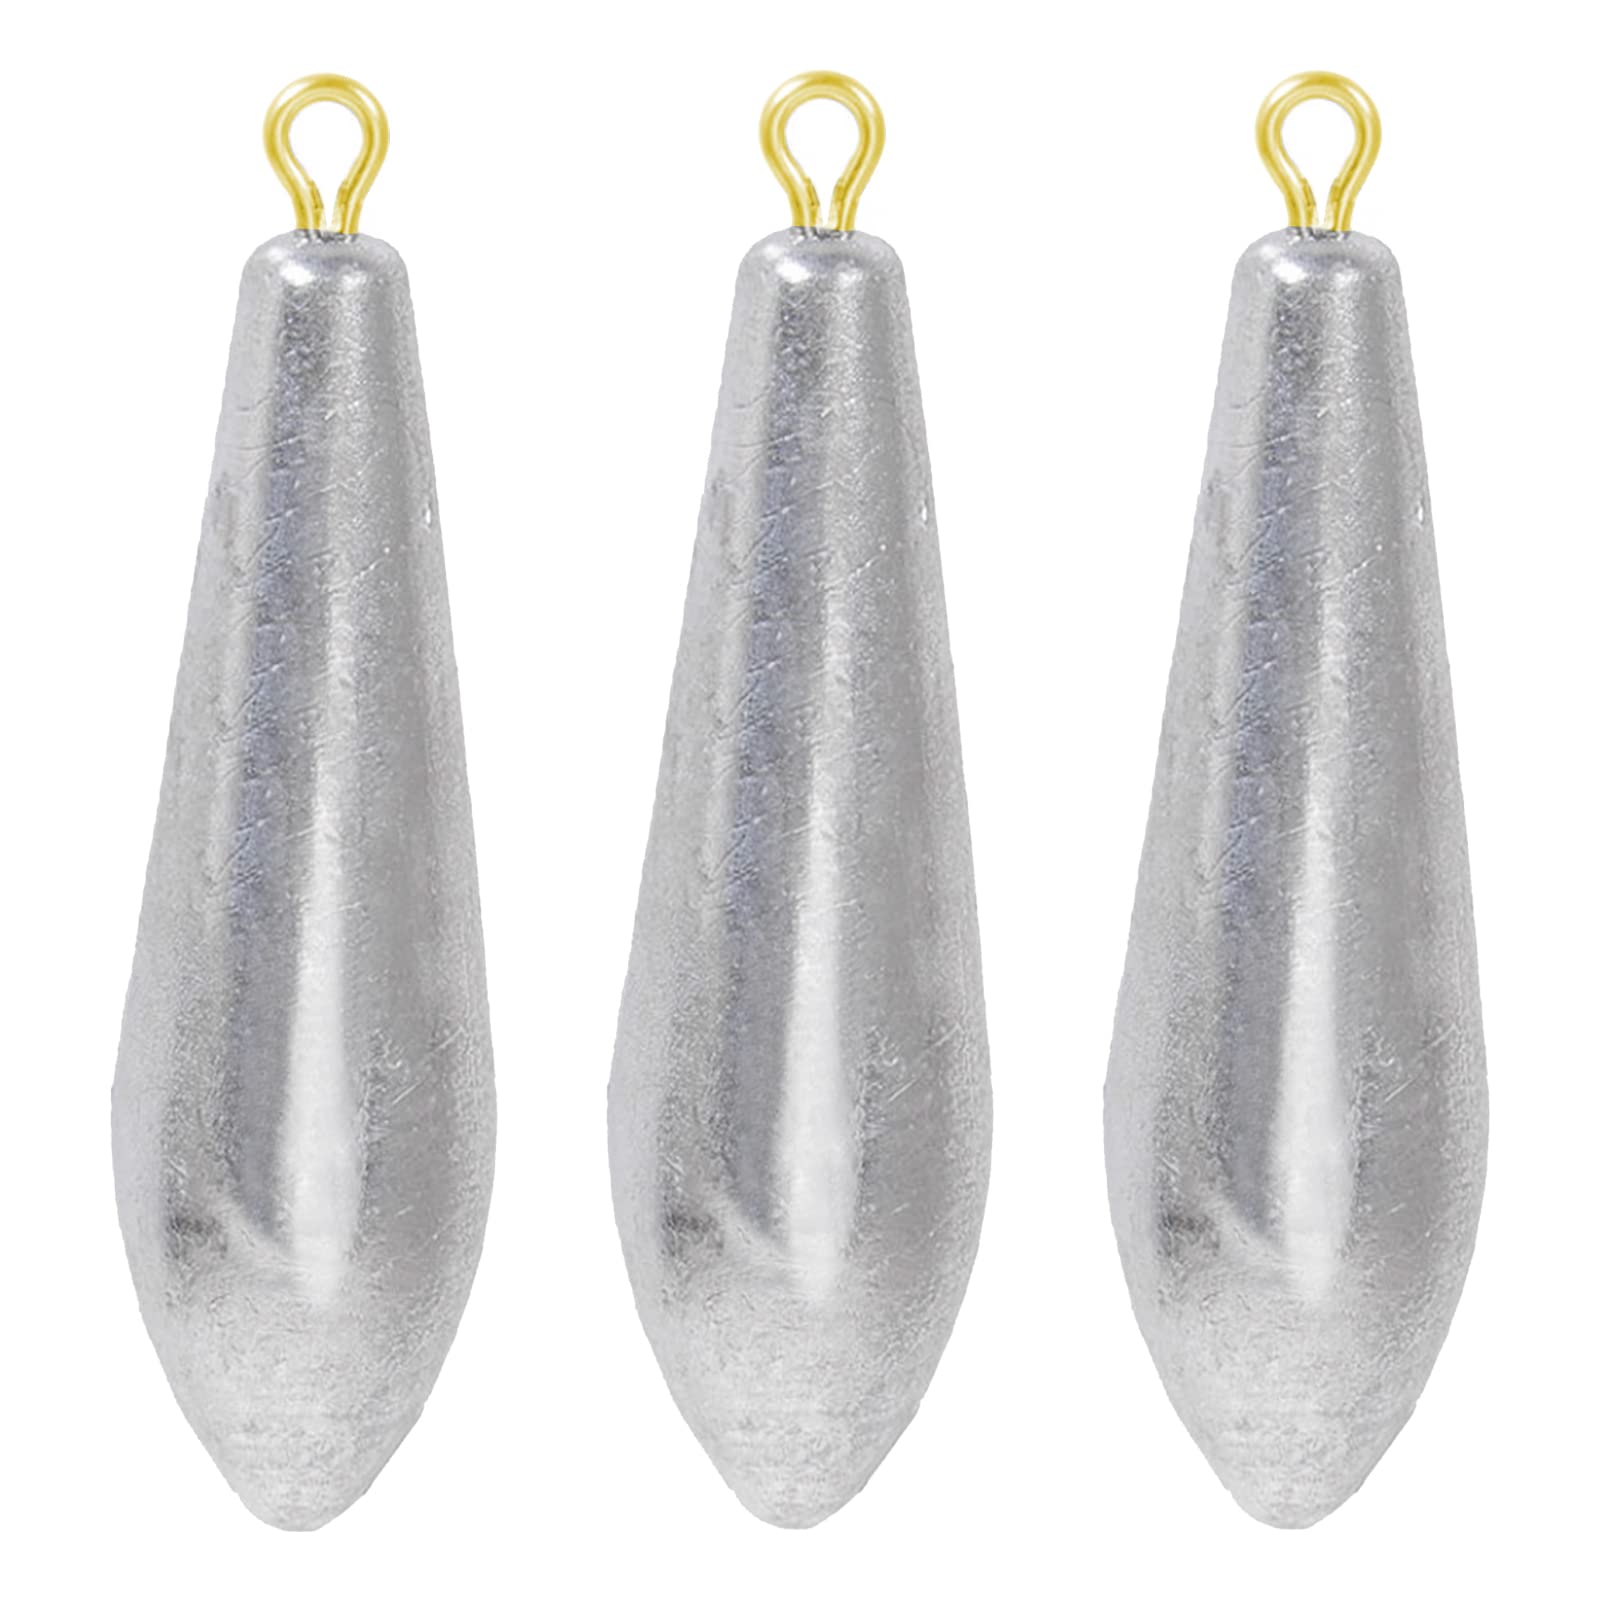 avlcoaky Avlcoaky Fishing Weights Sinkers Streamlined Shape Weights  Freshwater Saltwater Casting Drifting Bottom Fishing Accessory